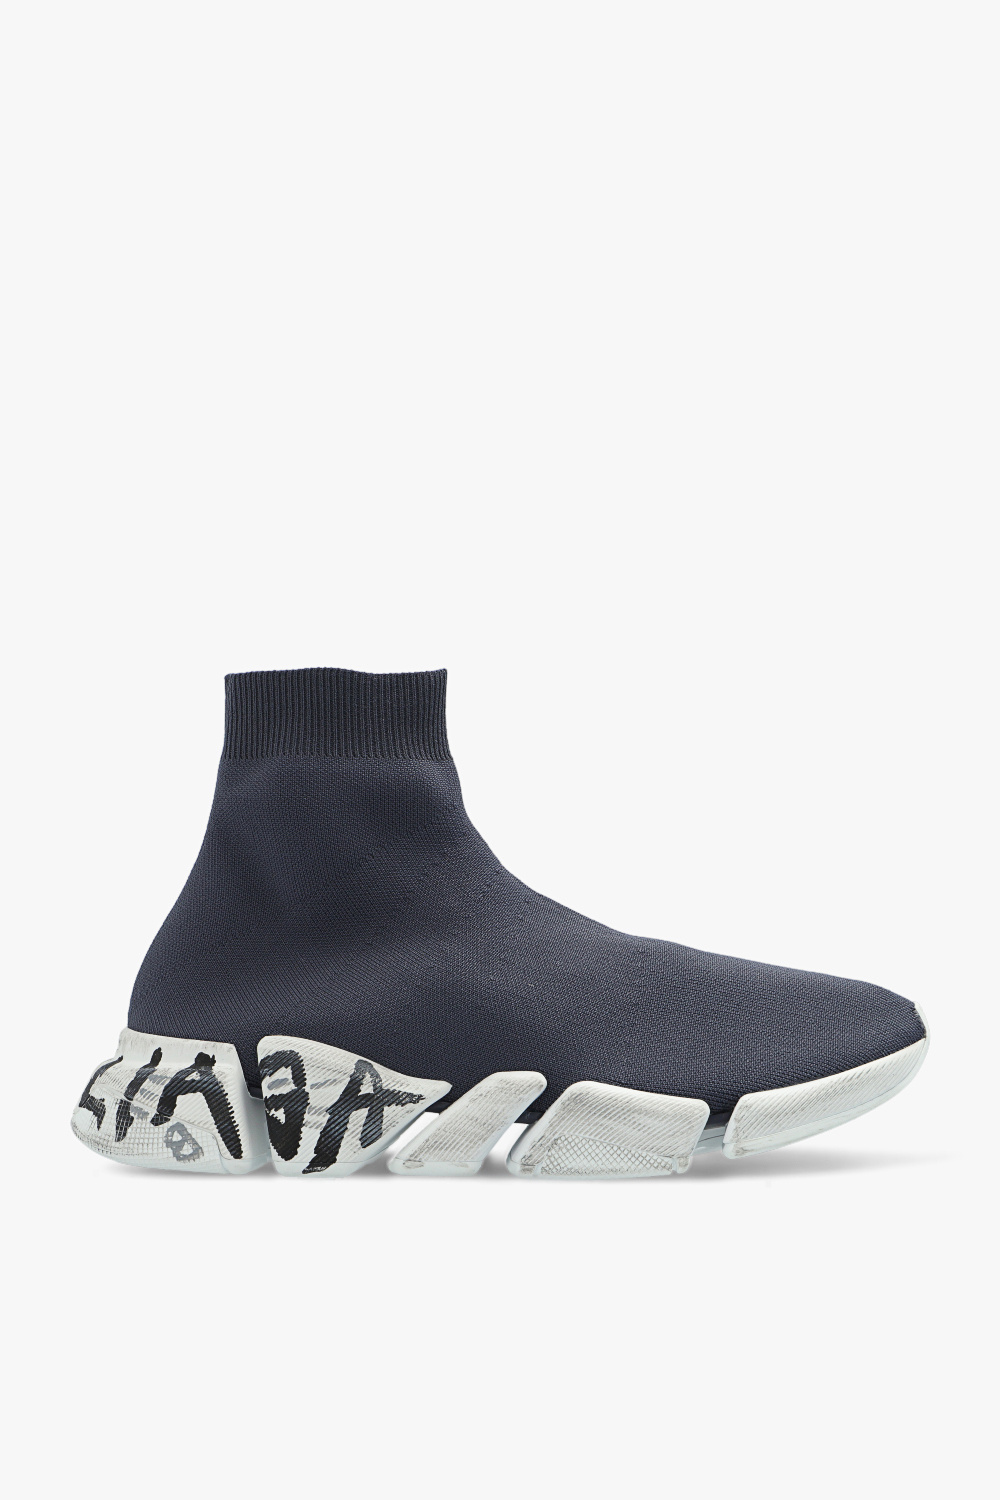 Balenciaga ‘Speed 2.0 LT’ sneakers with sock | Men's Shoes | Vitkac